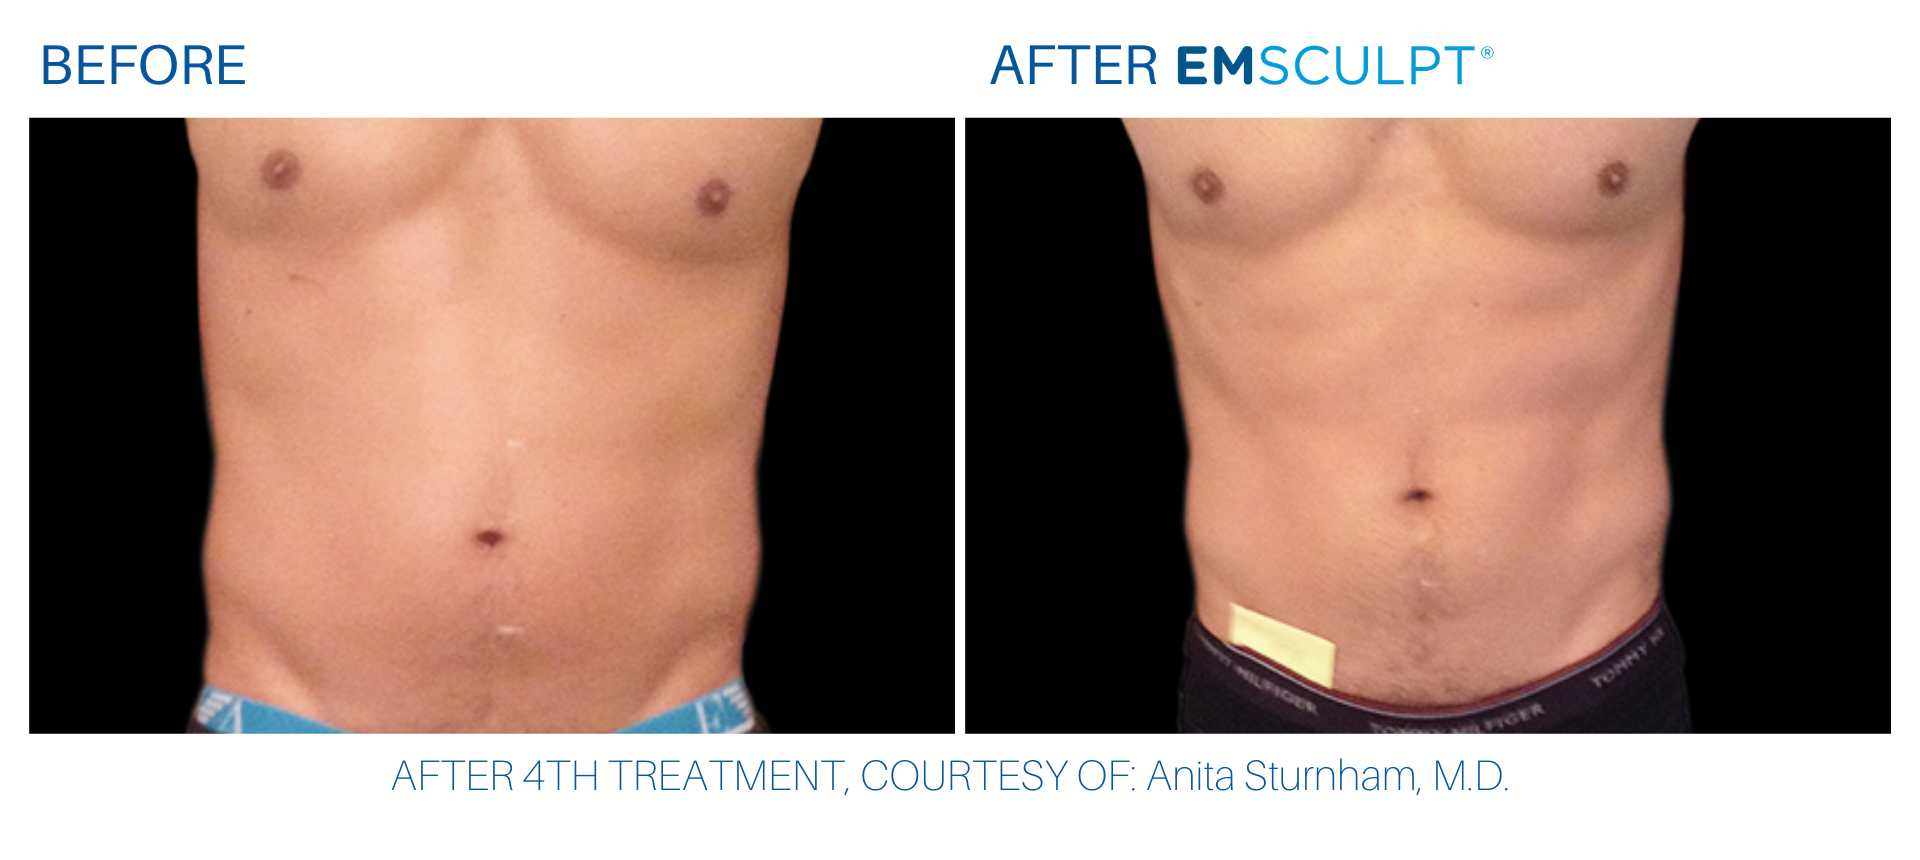 Abdomen before and after Emsculpt at Wellife.